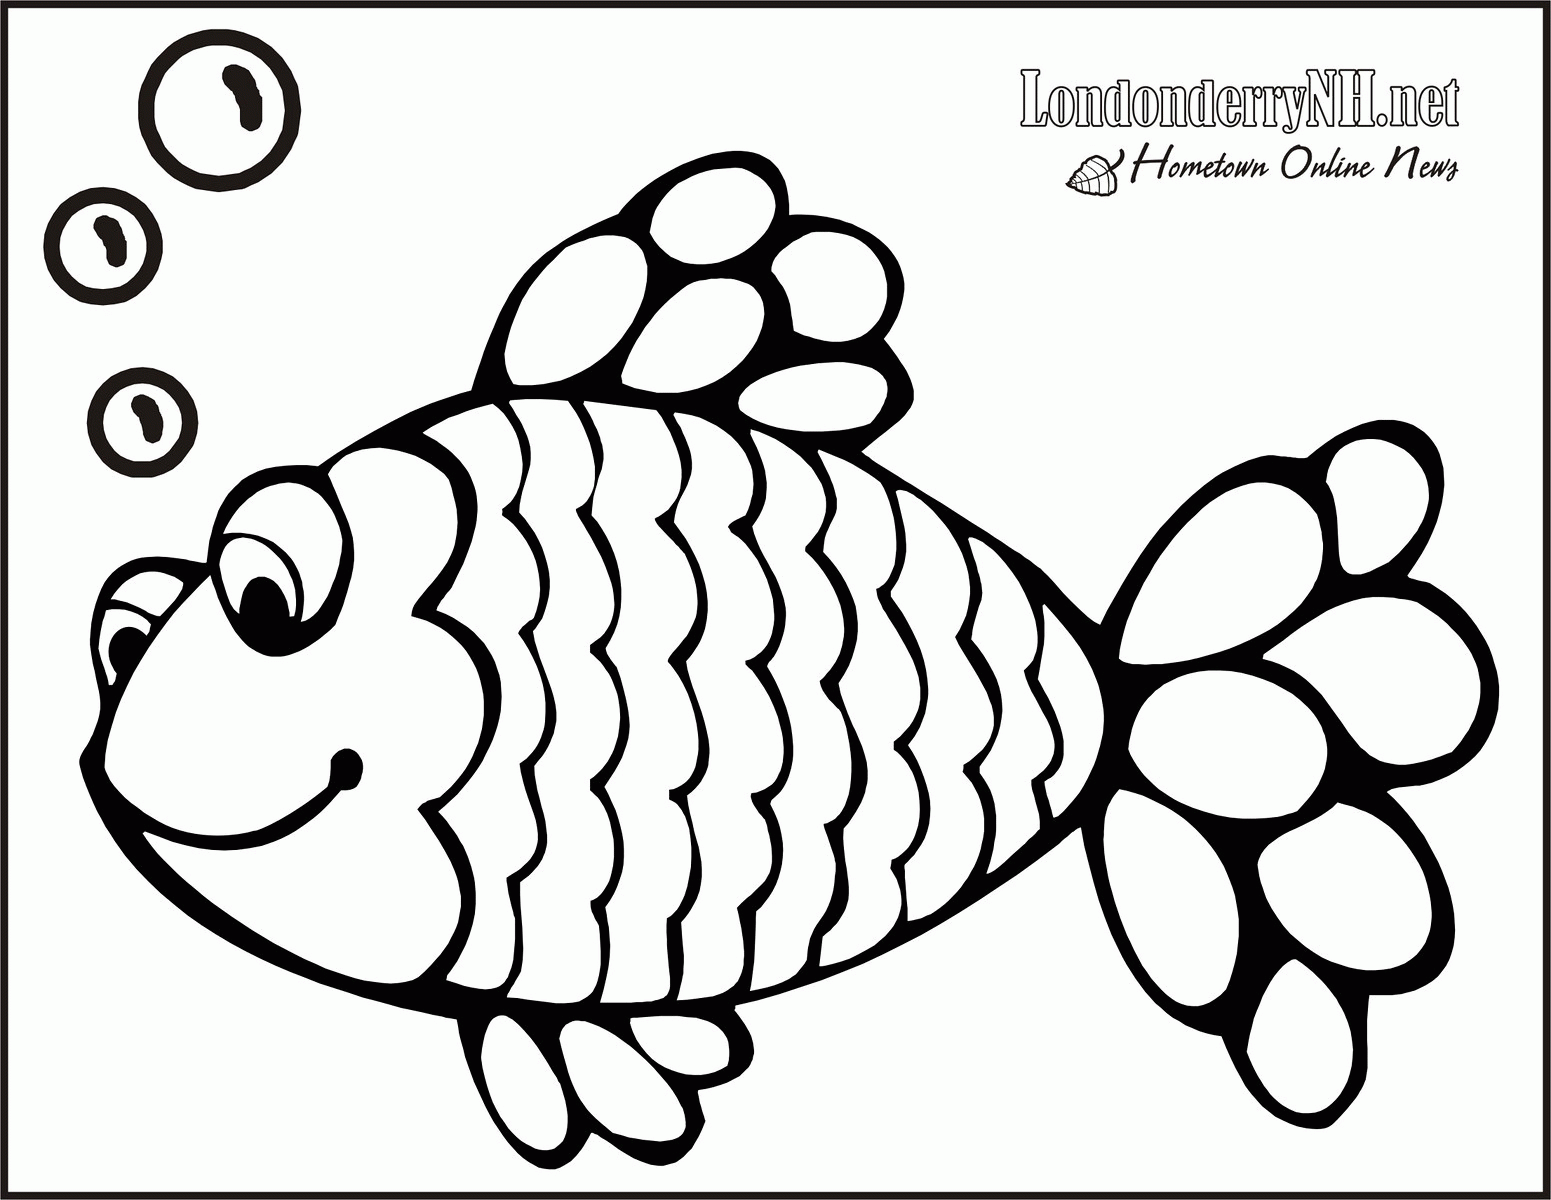 Rainbow Fish Template - Coloring Home